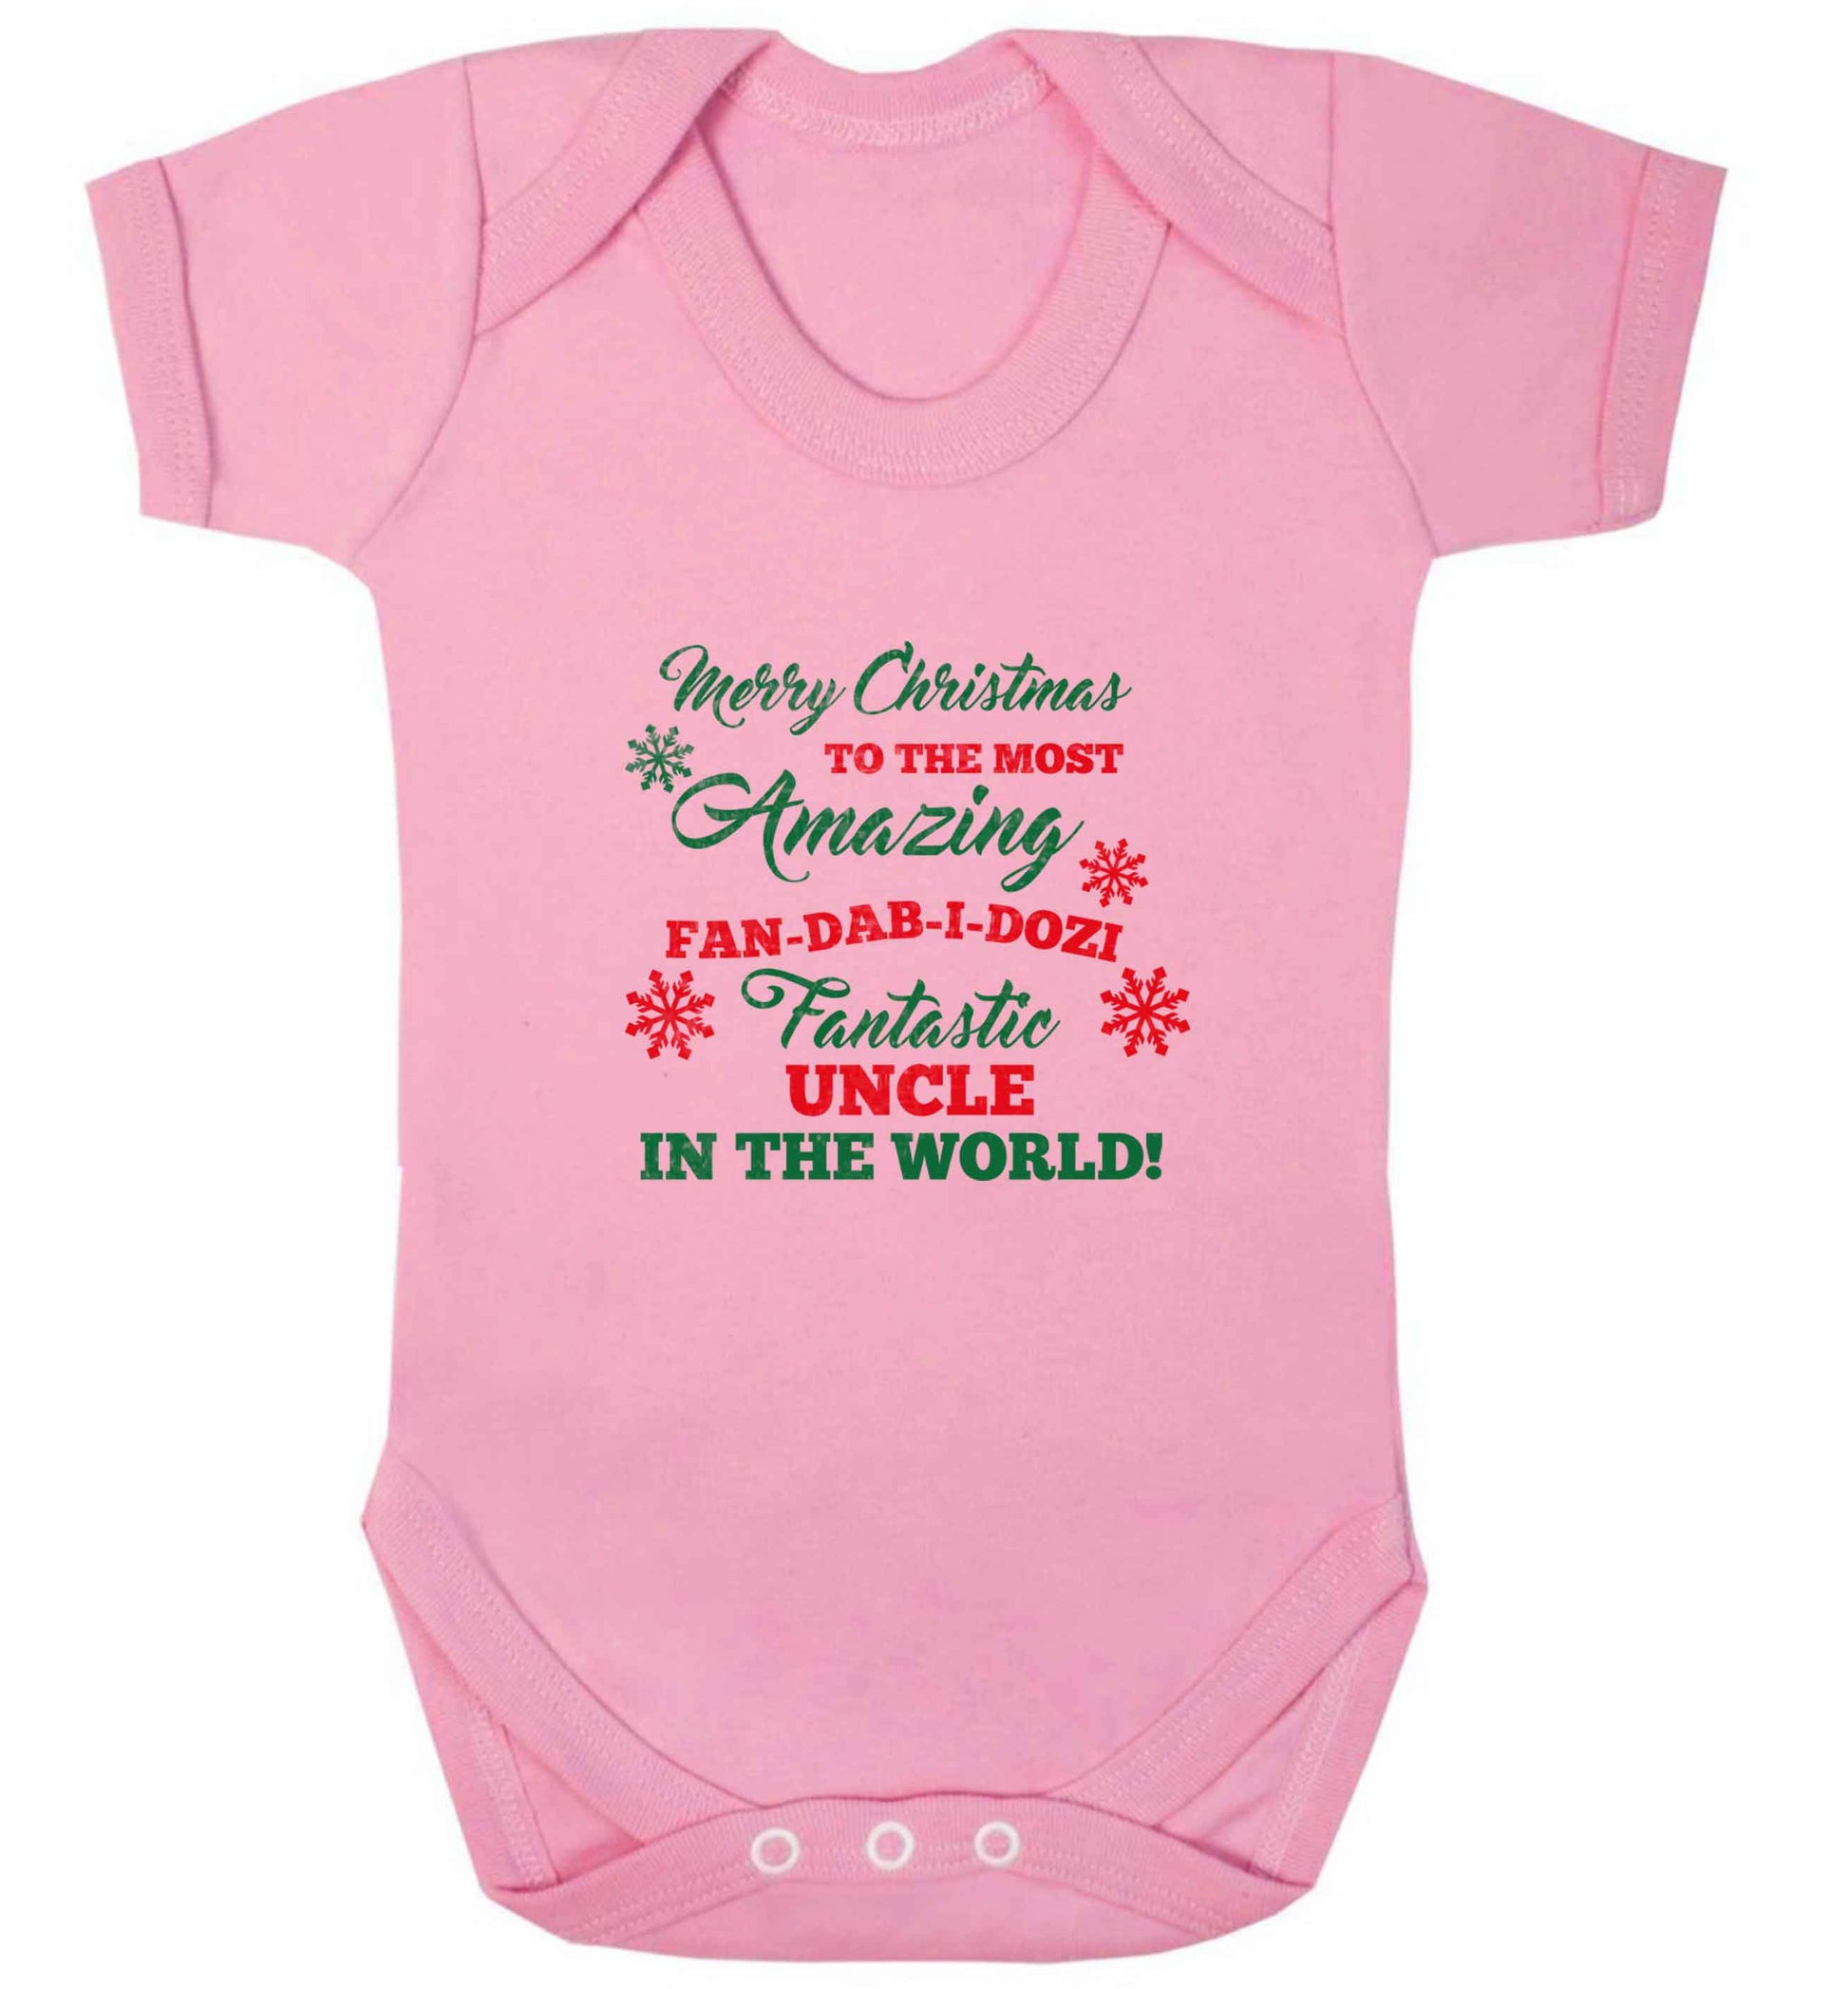 Merry Christmas to the most amazing fan-dab-i-dozi fantasic Uncle in the world baby vest pale pink 18-24 months